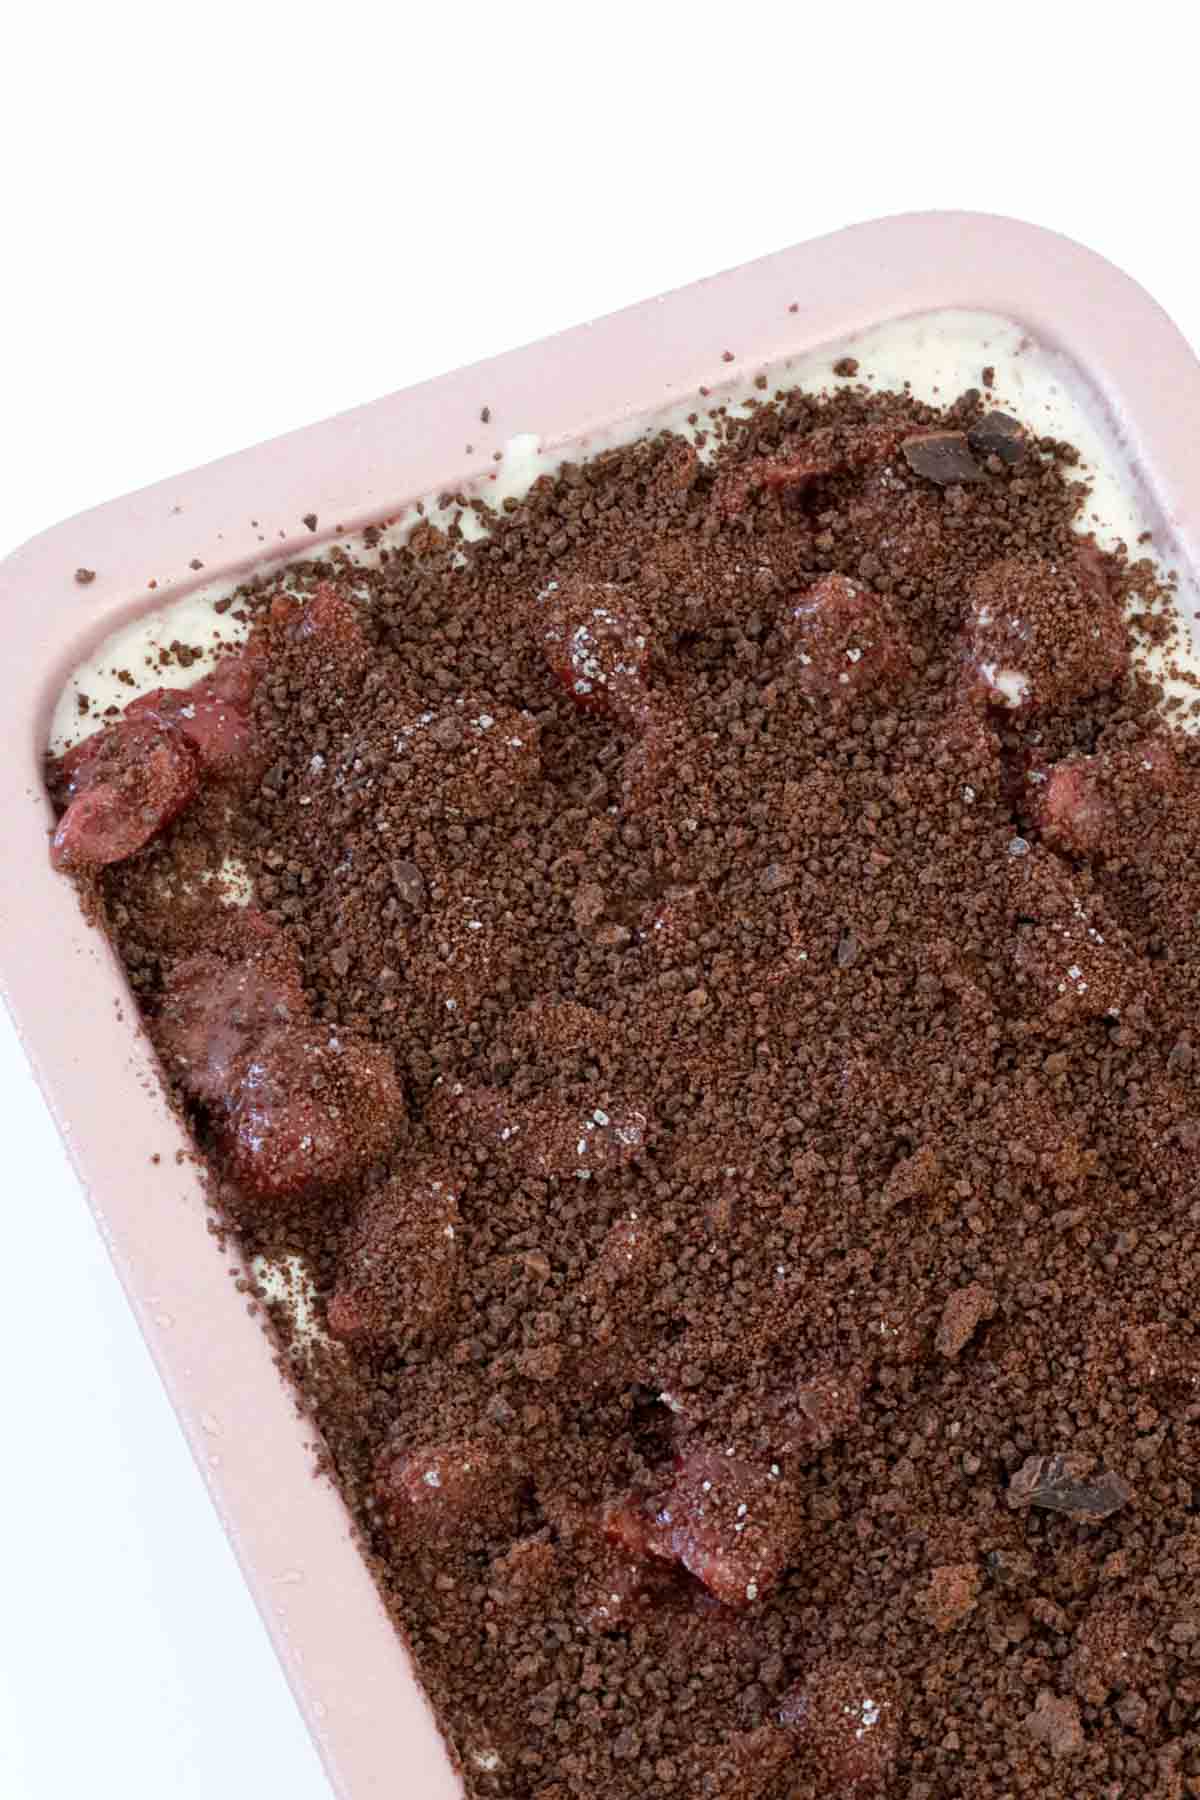 Chunks of cherries and grated dark chocolate spread over a frozen dessert in a loaf tin.